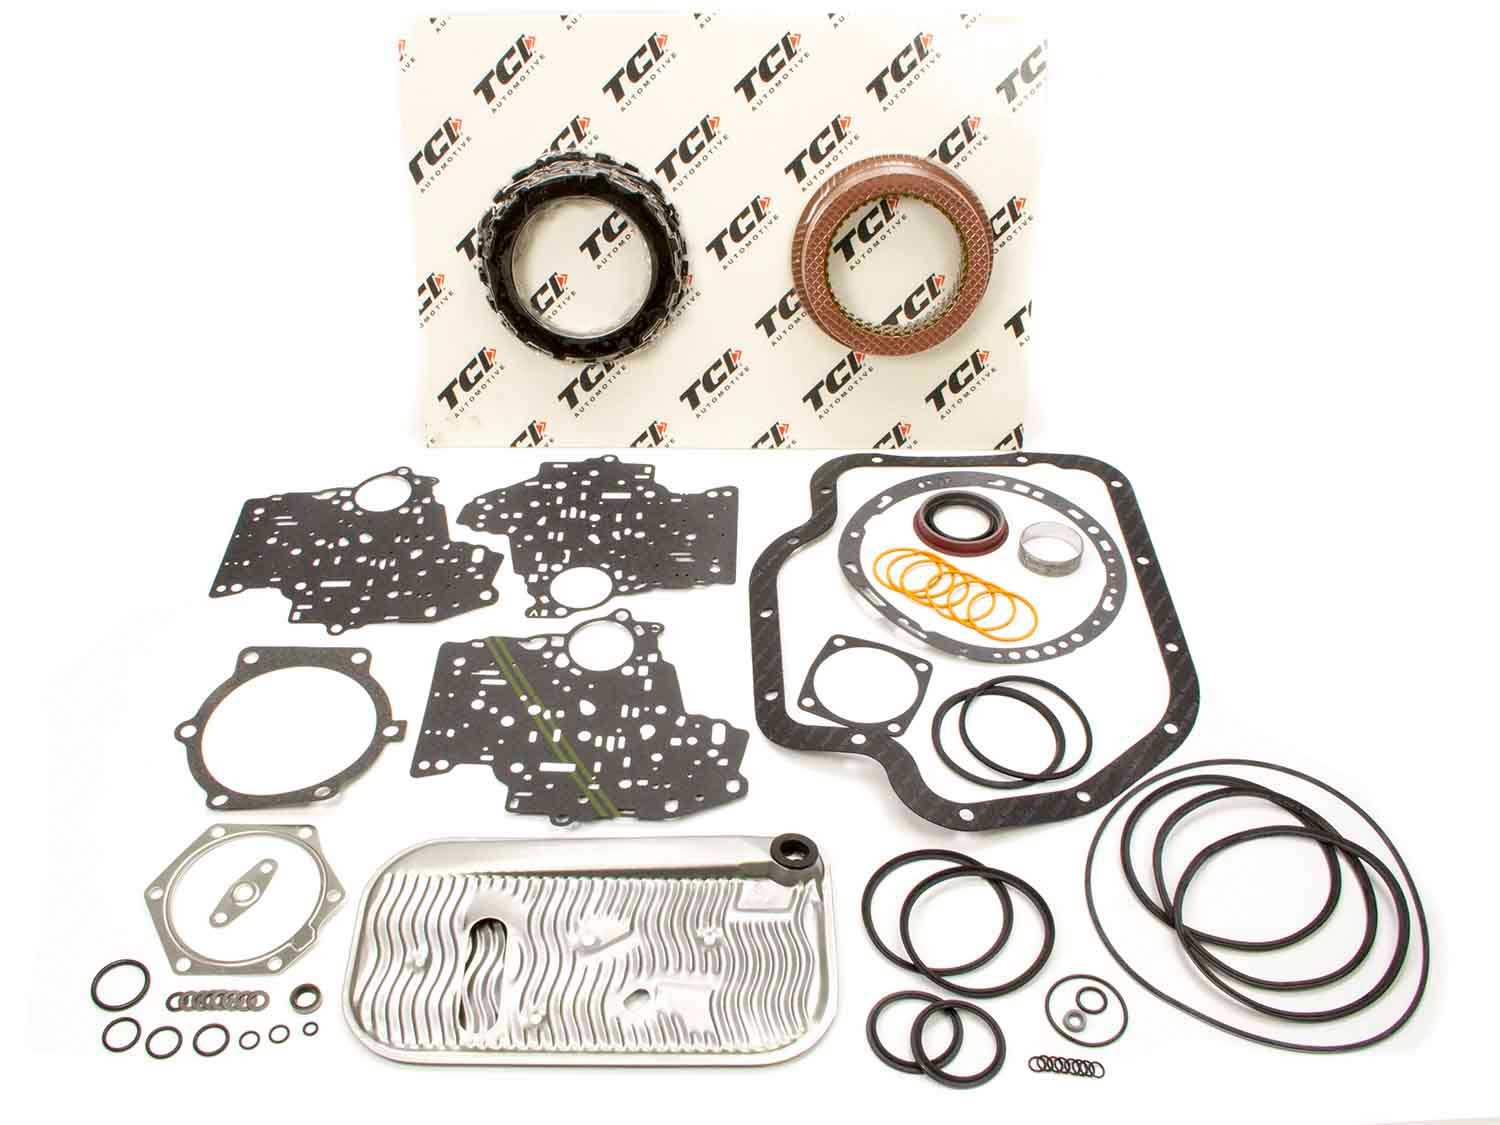 TCI 259015 Transmission Rebuild Kit, Automatic, Ultimate Master Racing, Clutches / Steels / Bands / Filter / Gaskets / Seals, TH400, Kit